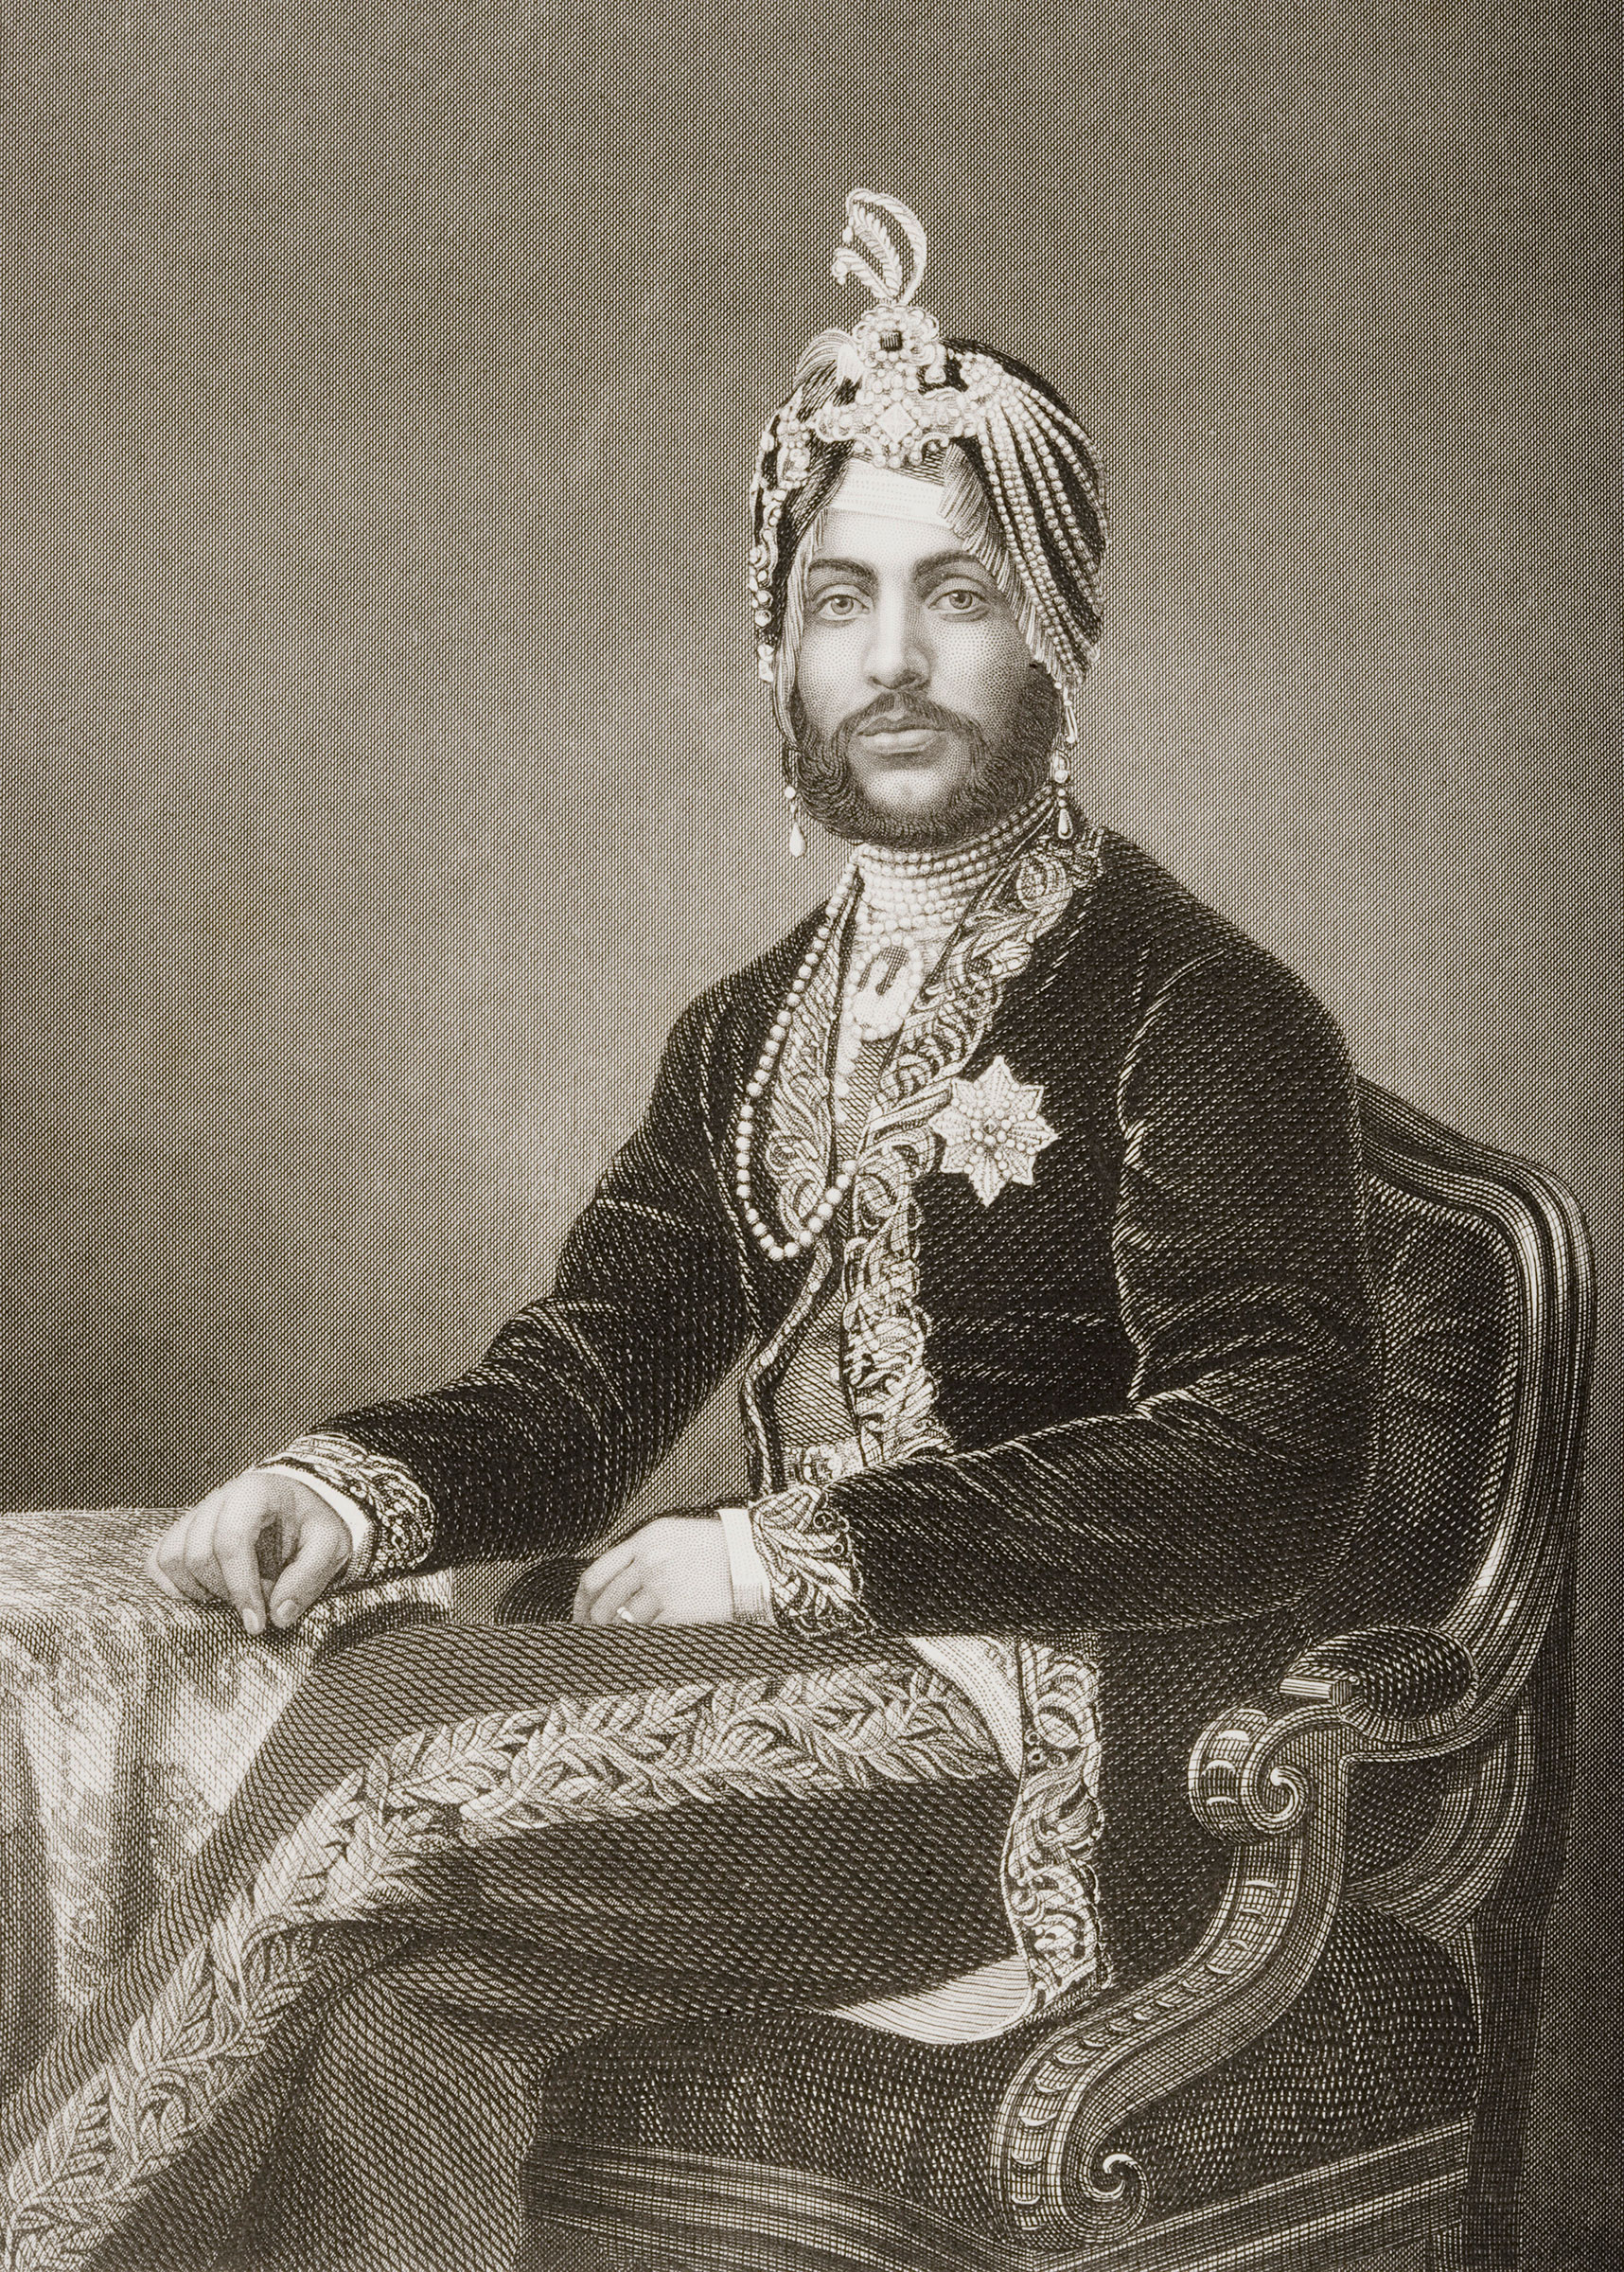 Duleep Singh, Maharajah of Lahore, 1837-1893. Engraved by D.J. Pound from a photograph by Mayall. From the book "The Drawing-Room Portrait Gallery of Eminent Personages" Published in London 1859.